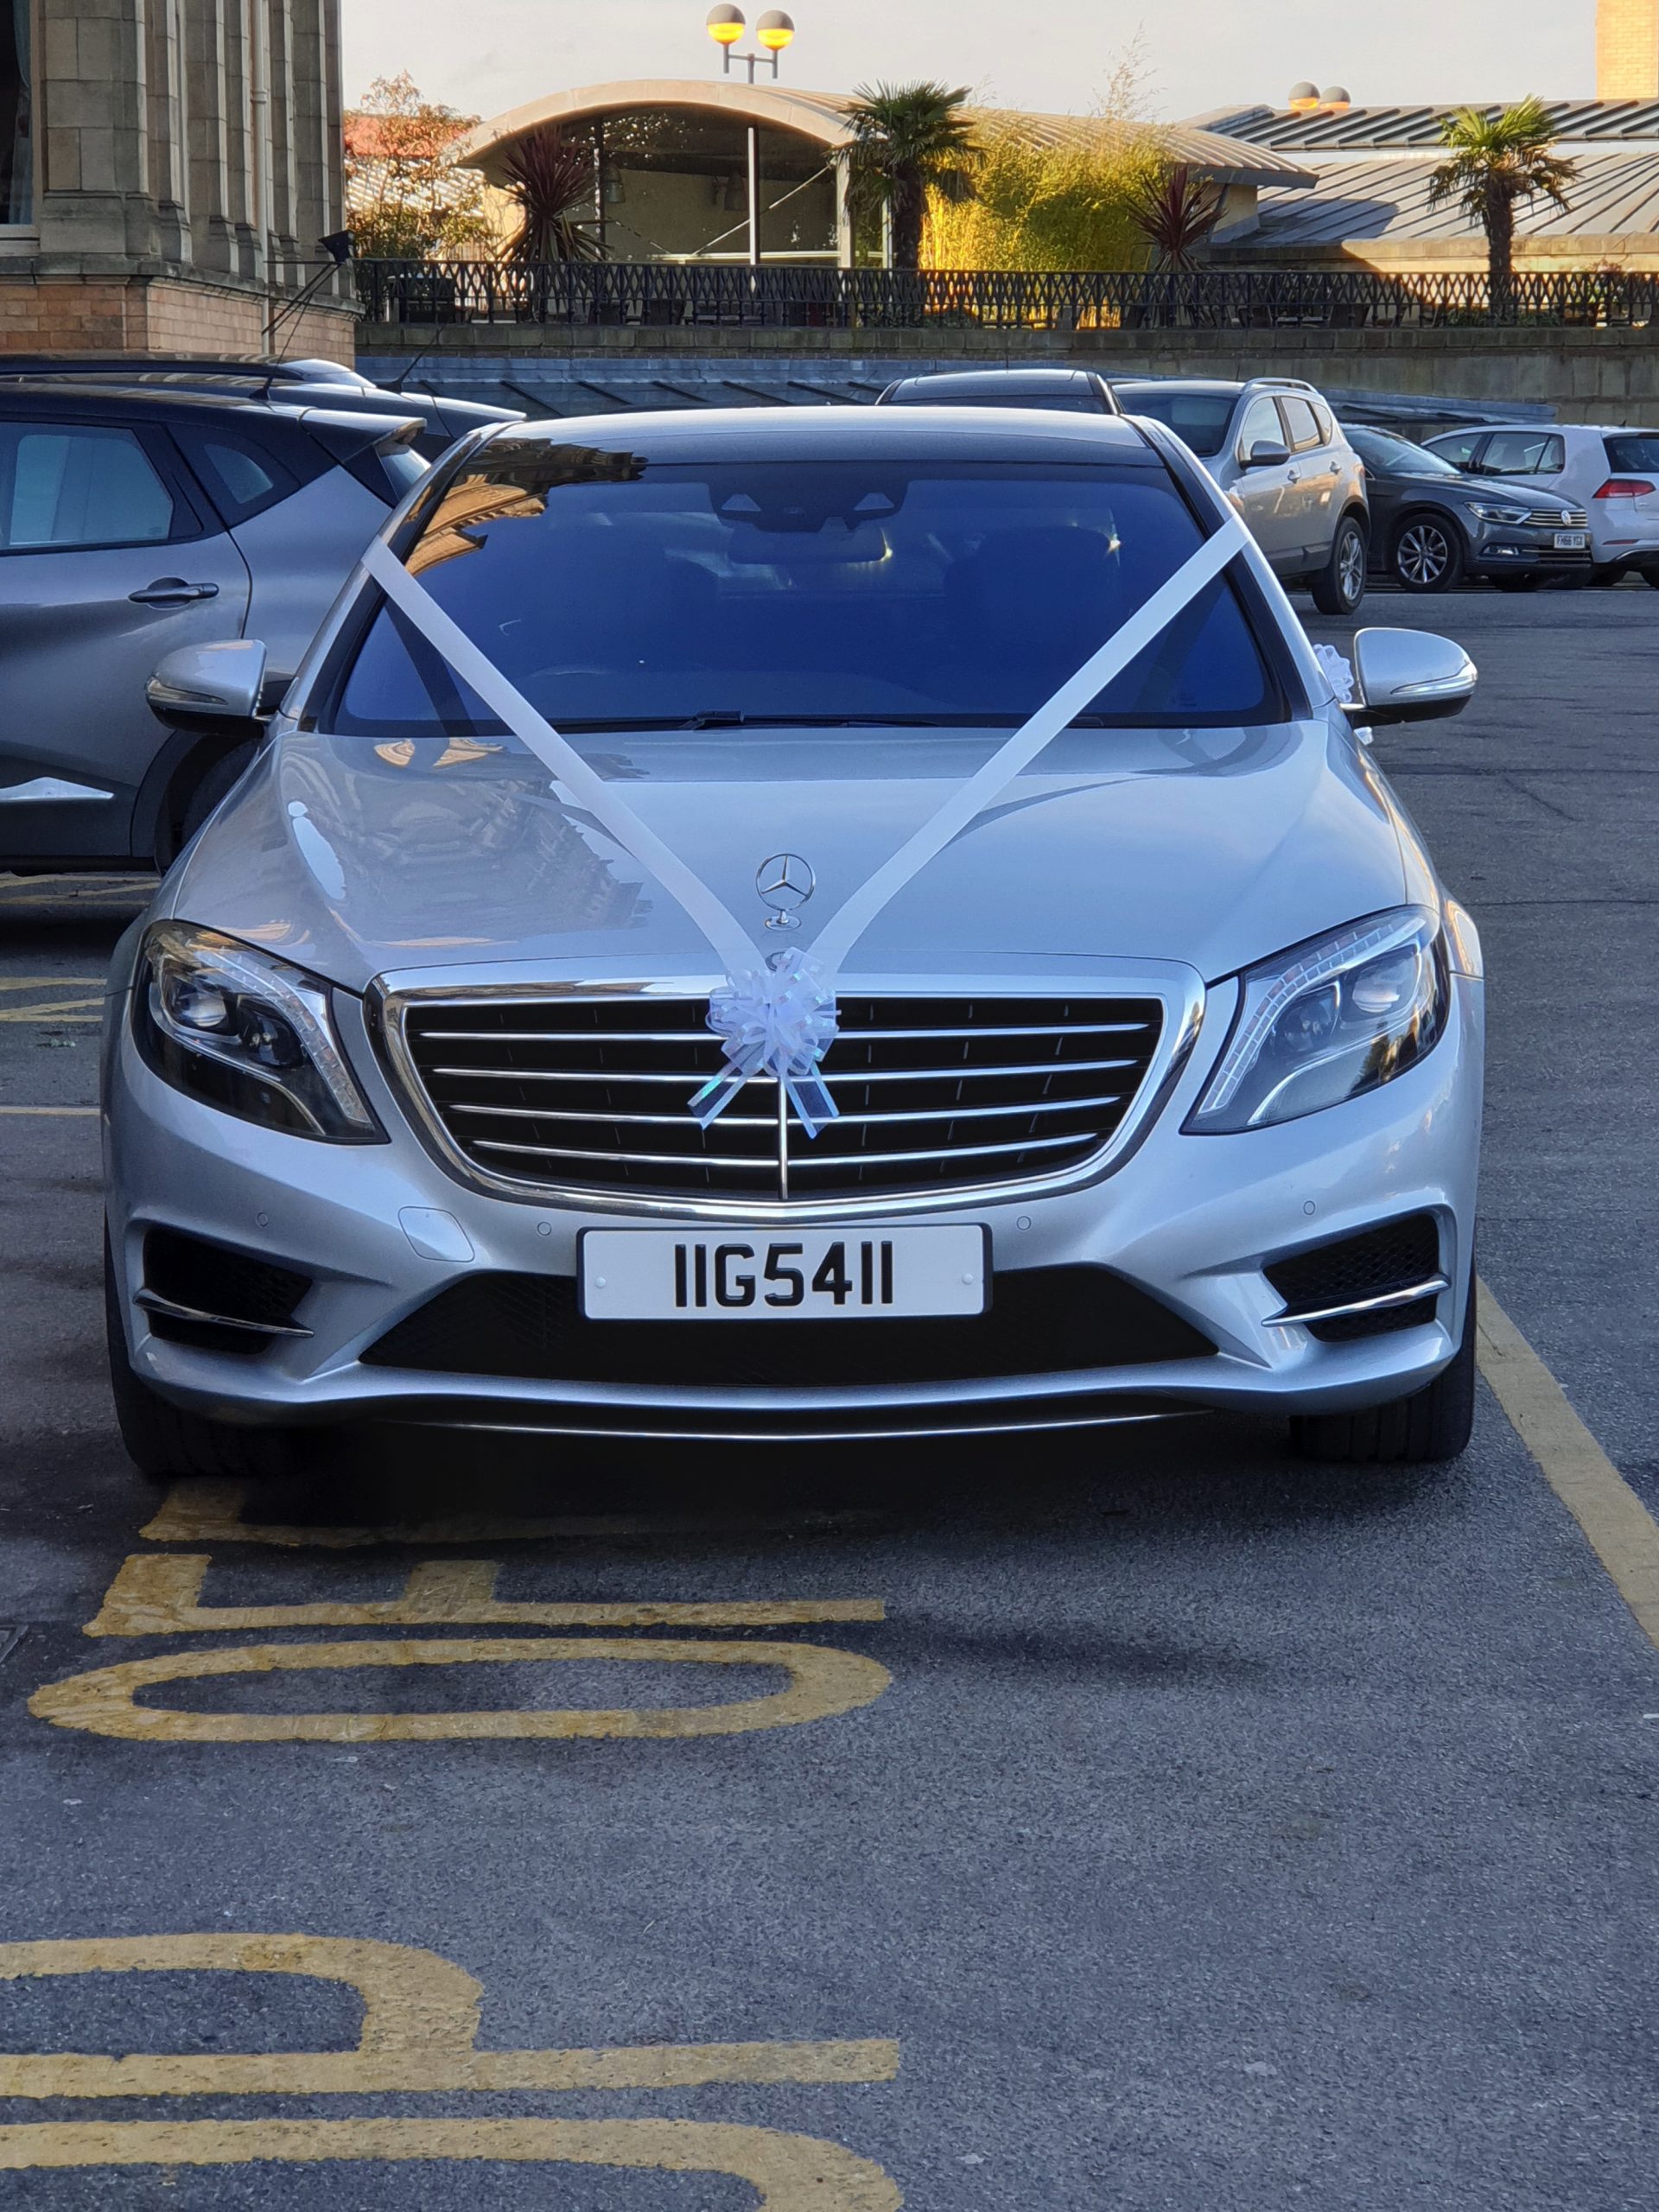 Mercedes s class outside the Principal Hotel York